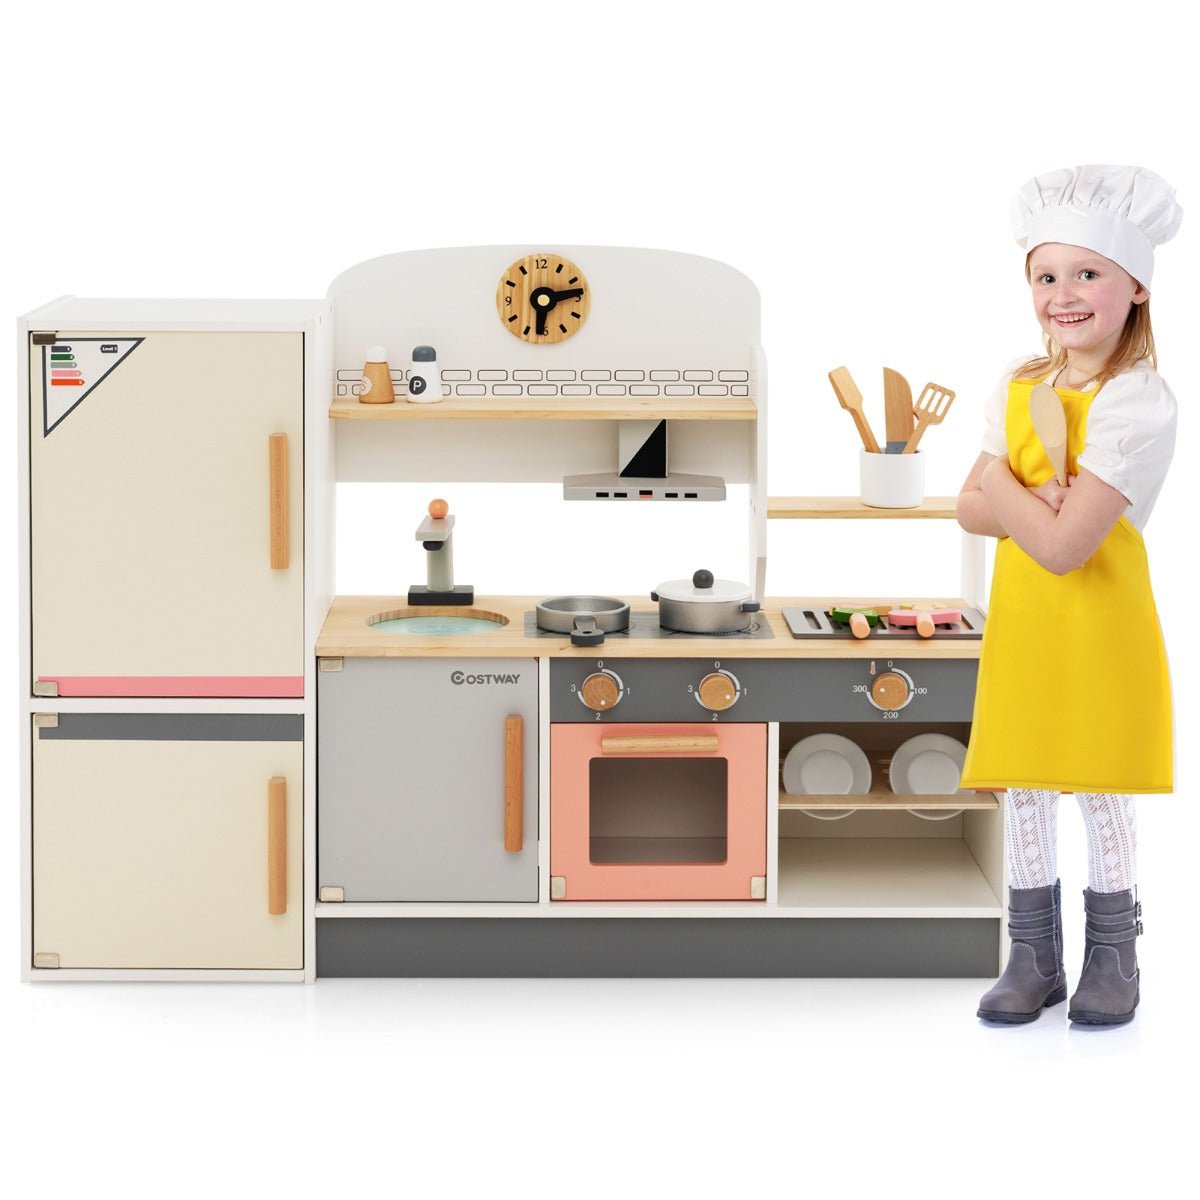 Creative Play Kitchen for Toddlers with Range Hood